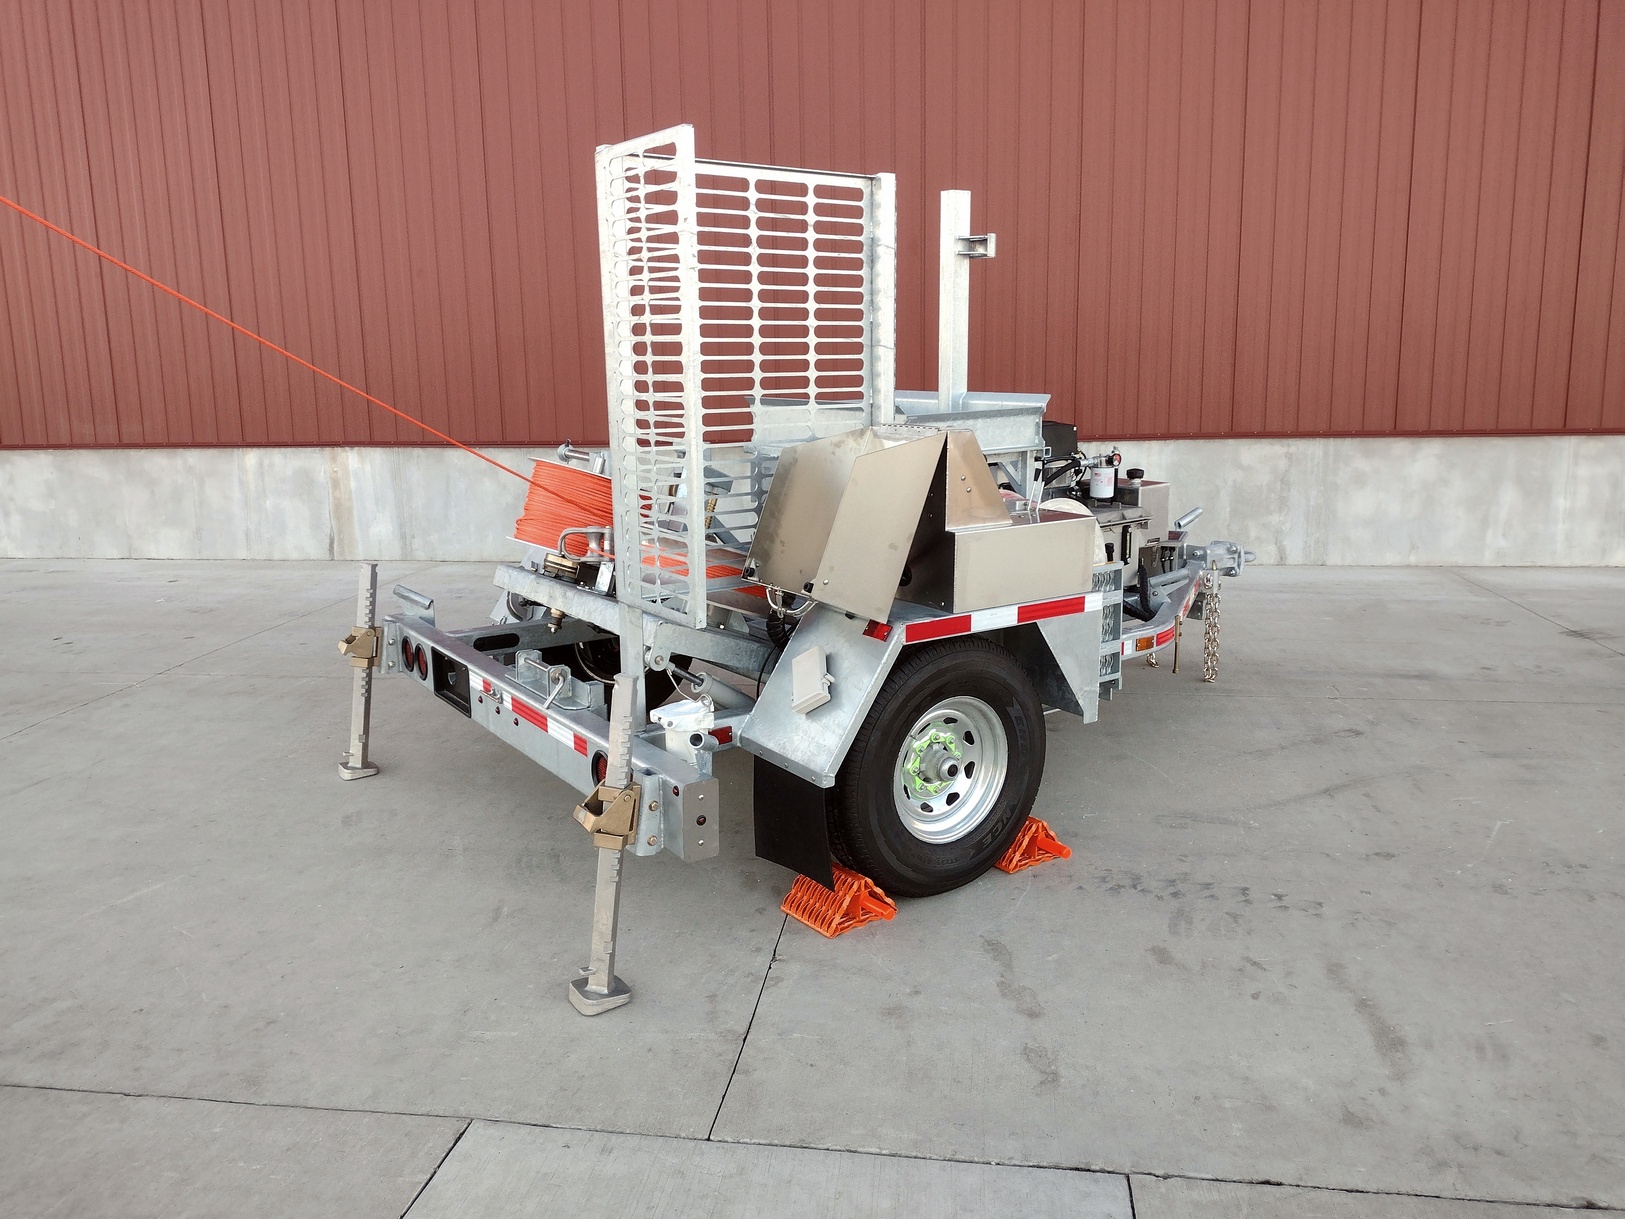 Right side rear view of the Sauber Model 1570-B Puller with orange pulling rope installed. The trailer has galvanized finish and is shown on concrete in front of a red metal building.